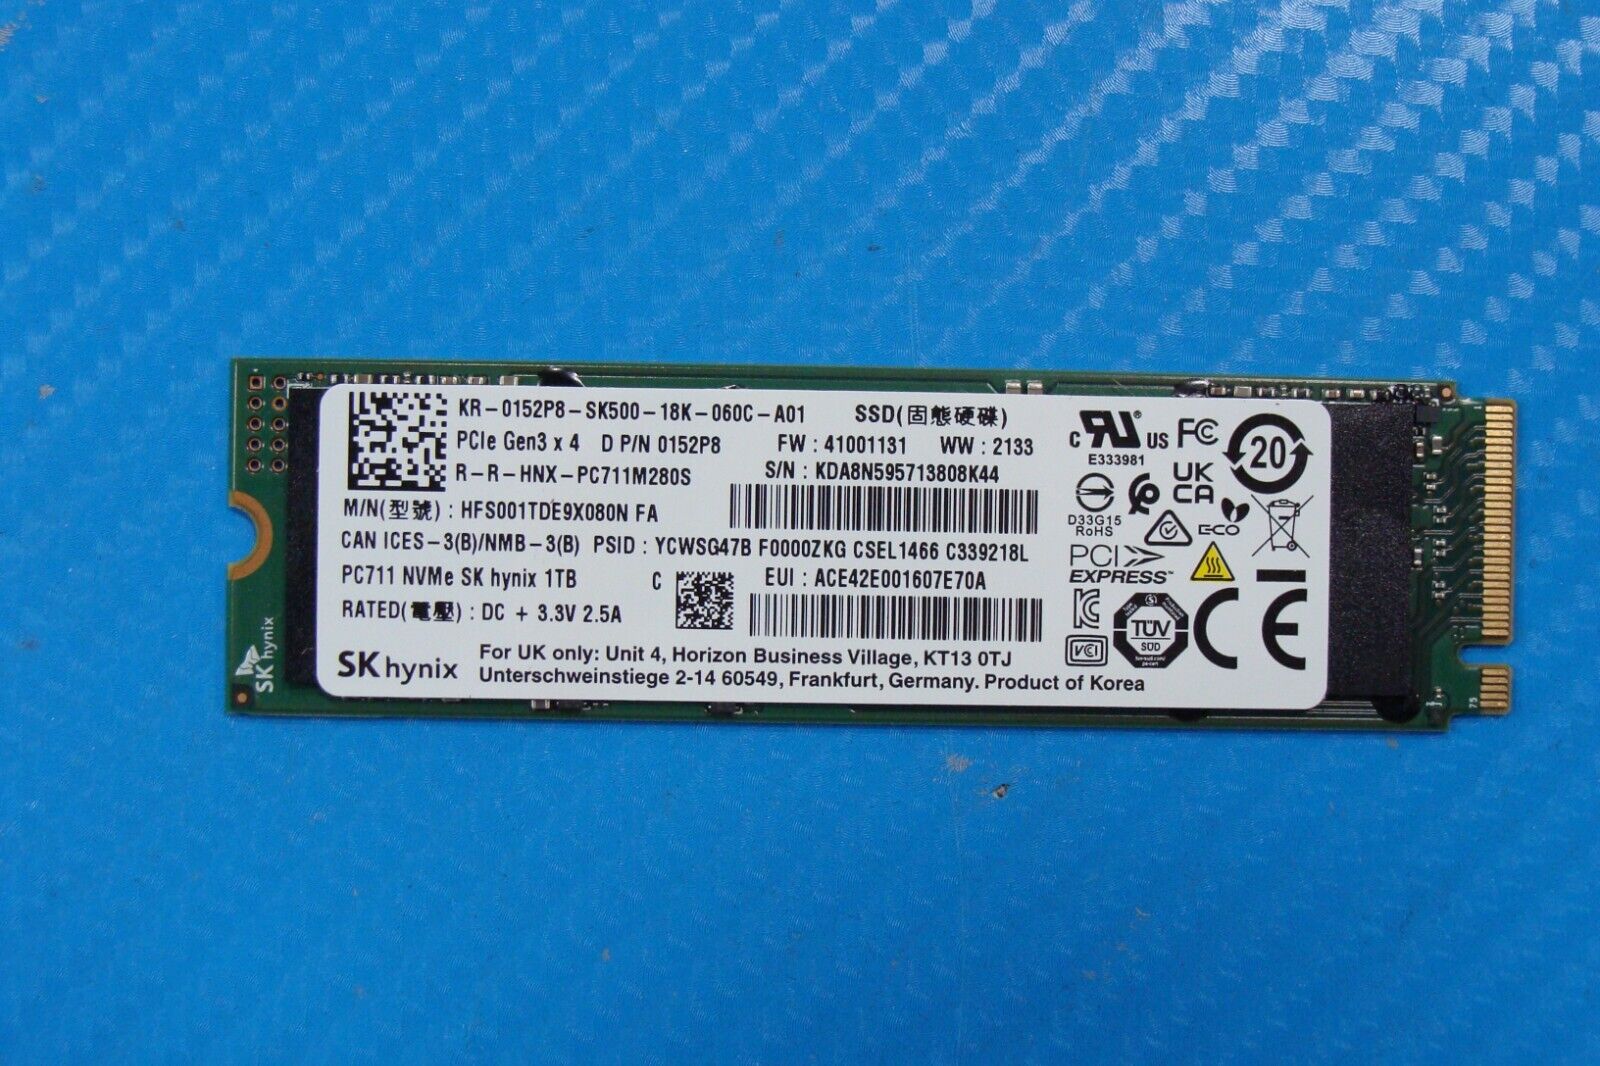 Dell 15 9510 SK Hynix 1TB M.2 NVMe SSD Solid State Drive HFS001TDE9X080N 152P8